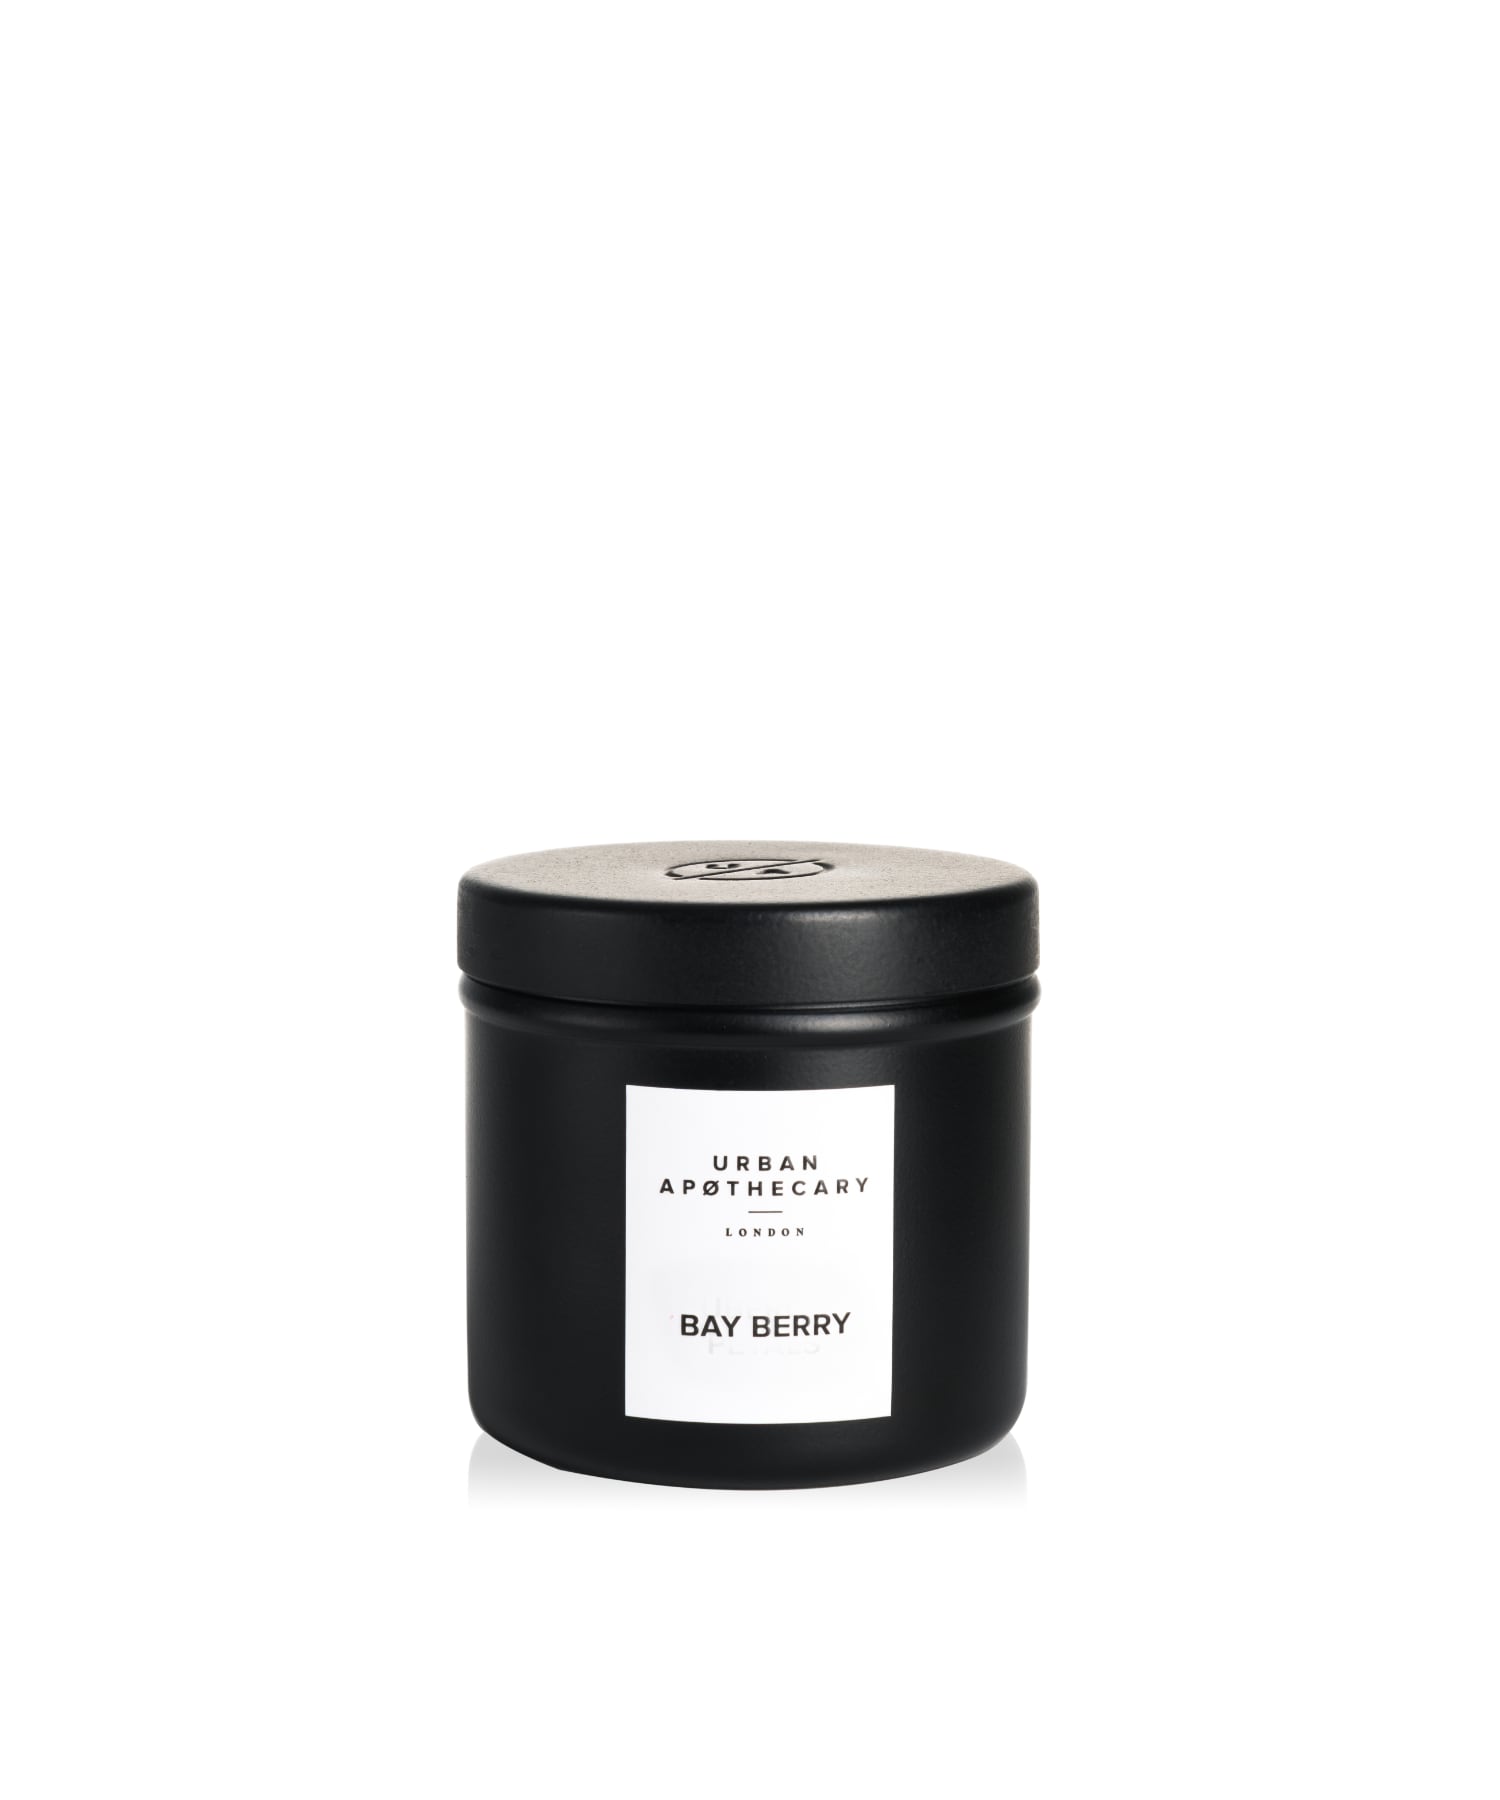 URBAN APOTHECARY Bay Berry Luxury Iron Travel Candle 175 g